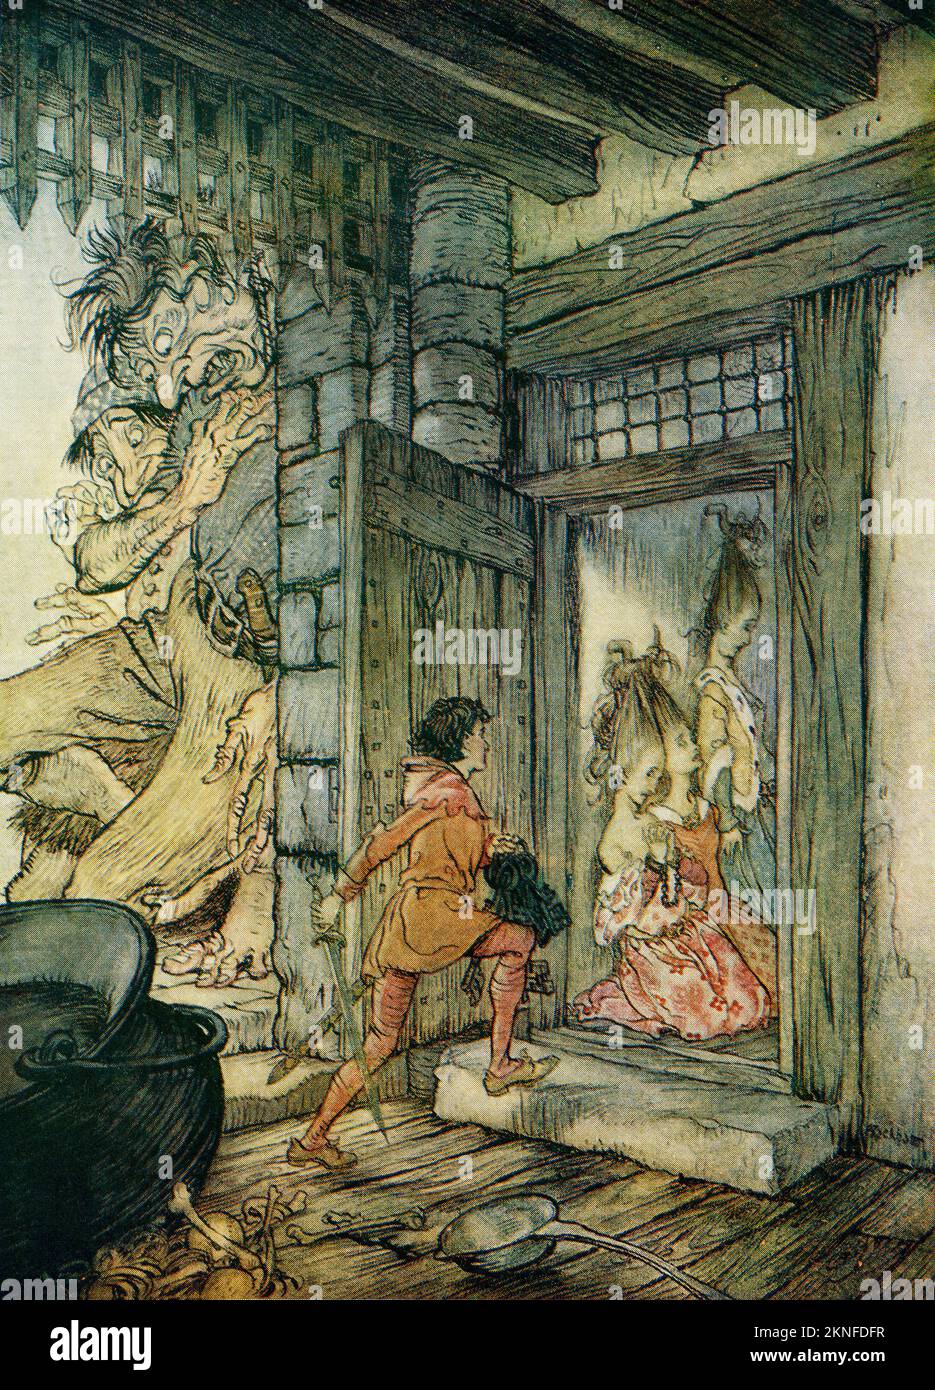 Taking the keys of the castle Jack unlocked all the doors.  Illustration to Jack the Giant Killer from the book English Fairy Tales retold by F.A. Steel with illustrations by Arthur Rackham, published 1927. Stock Photo